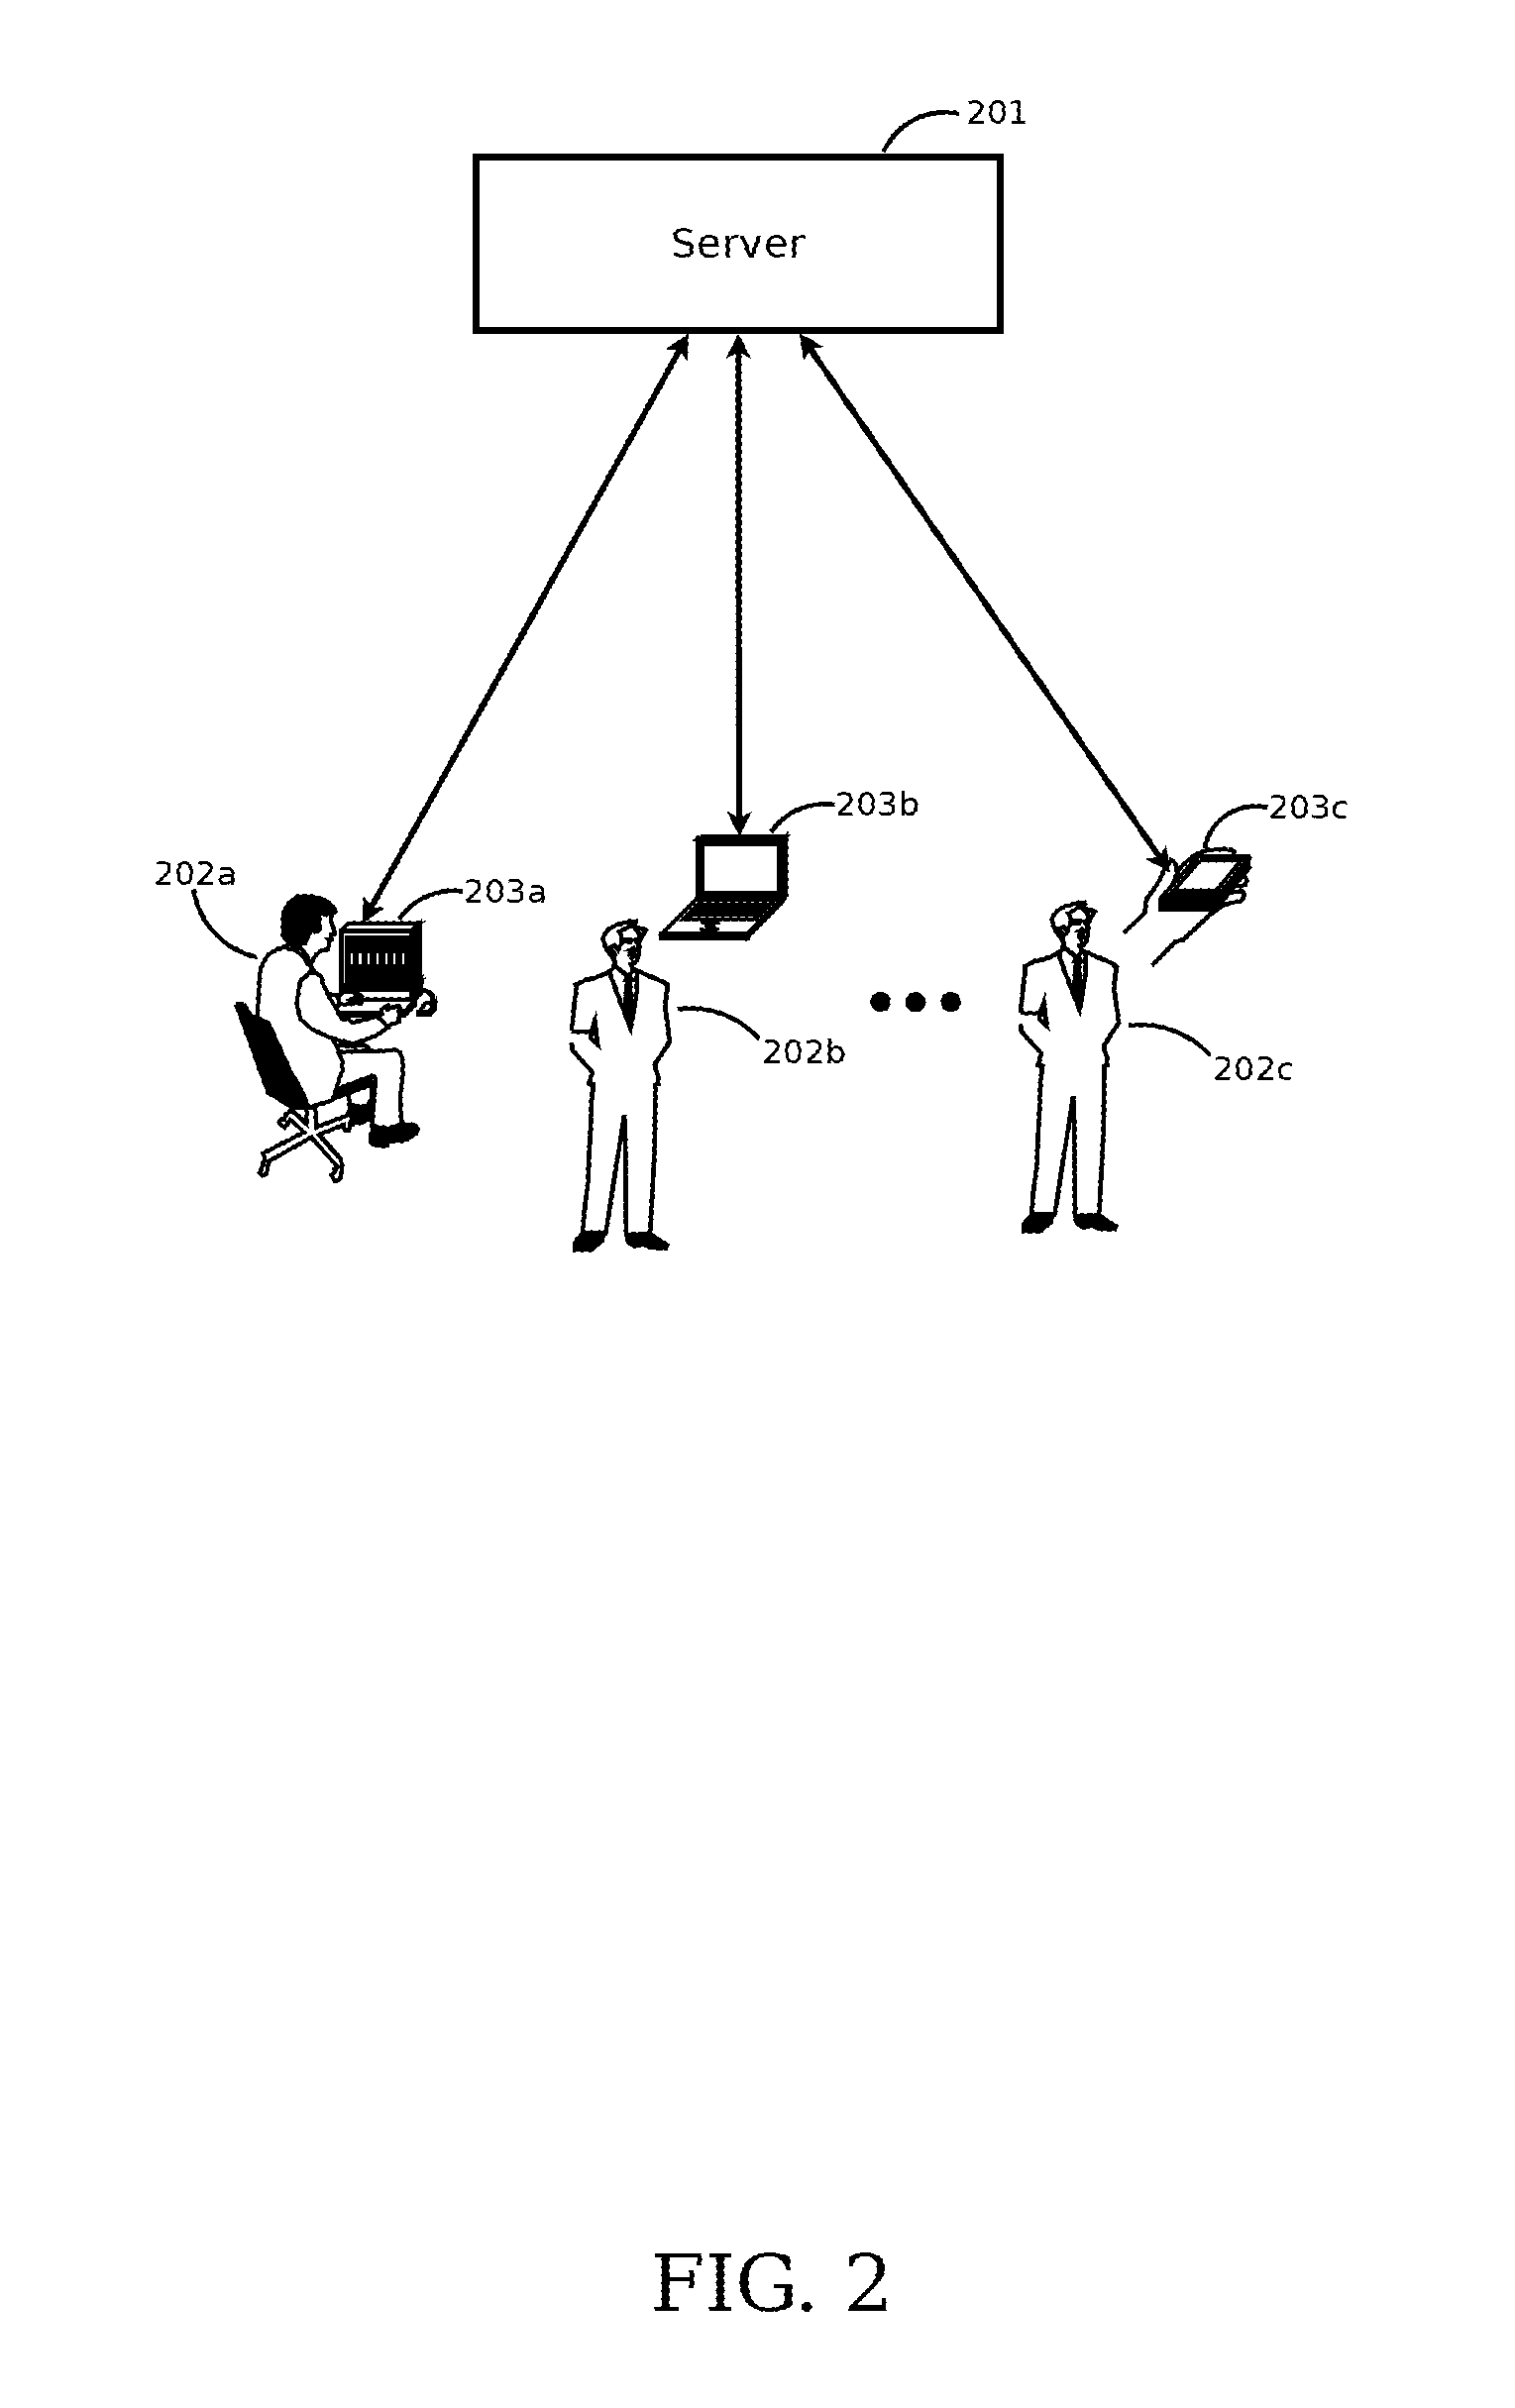 Systems and methods for managing lost devices of multiple types with multiple policies using melded profiles associated with groups